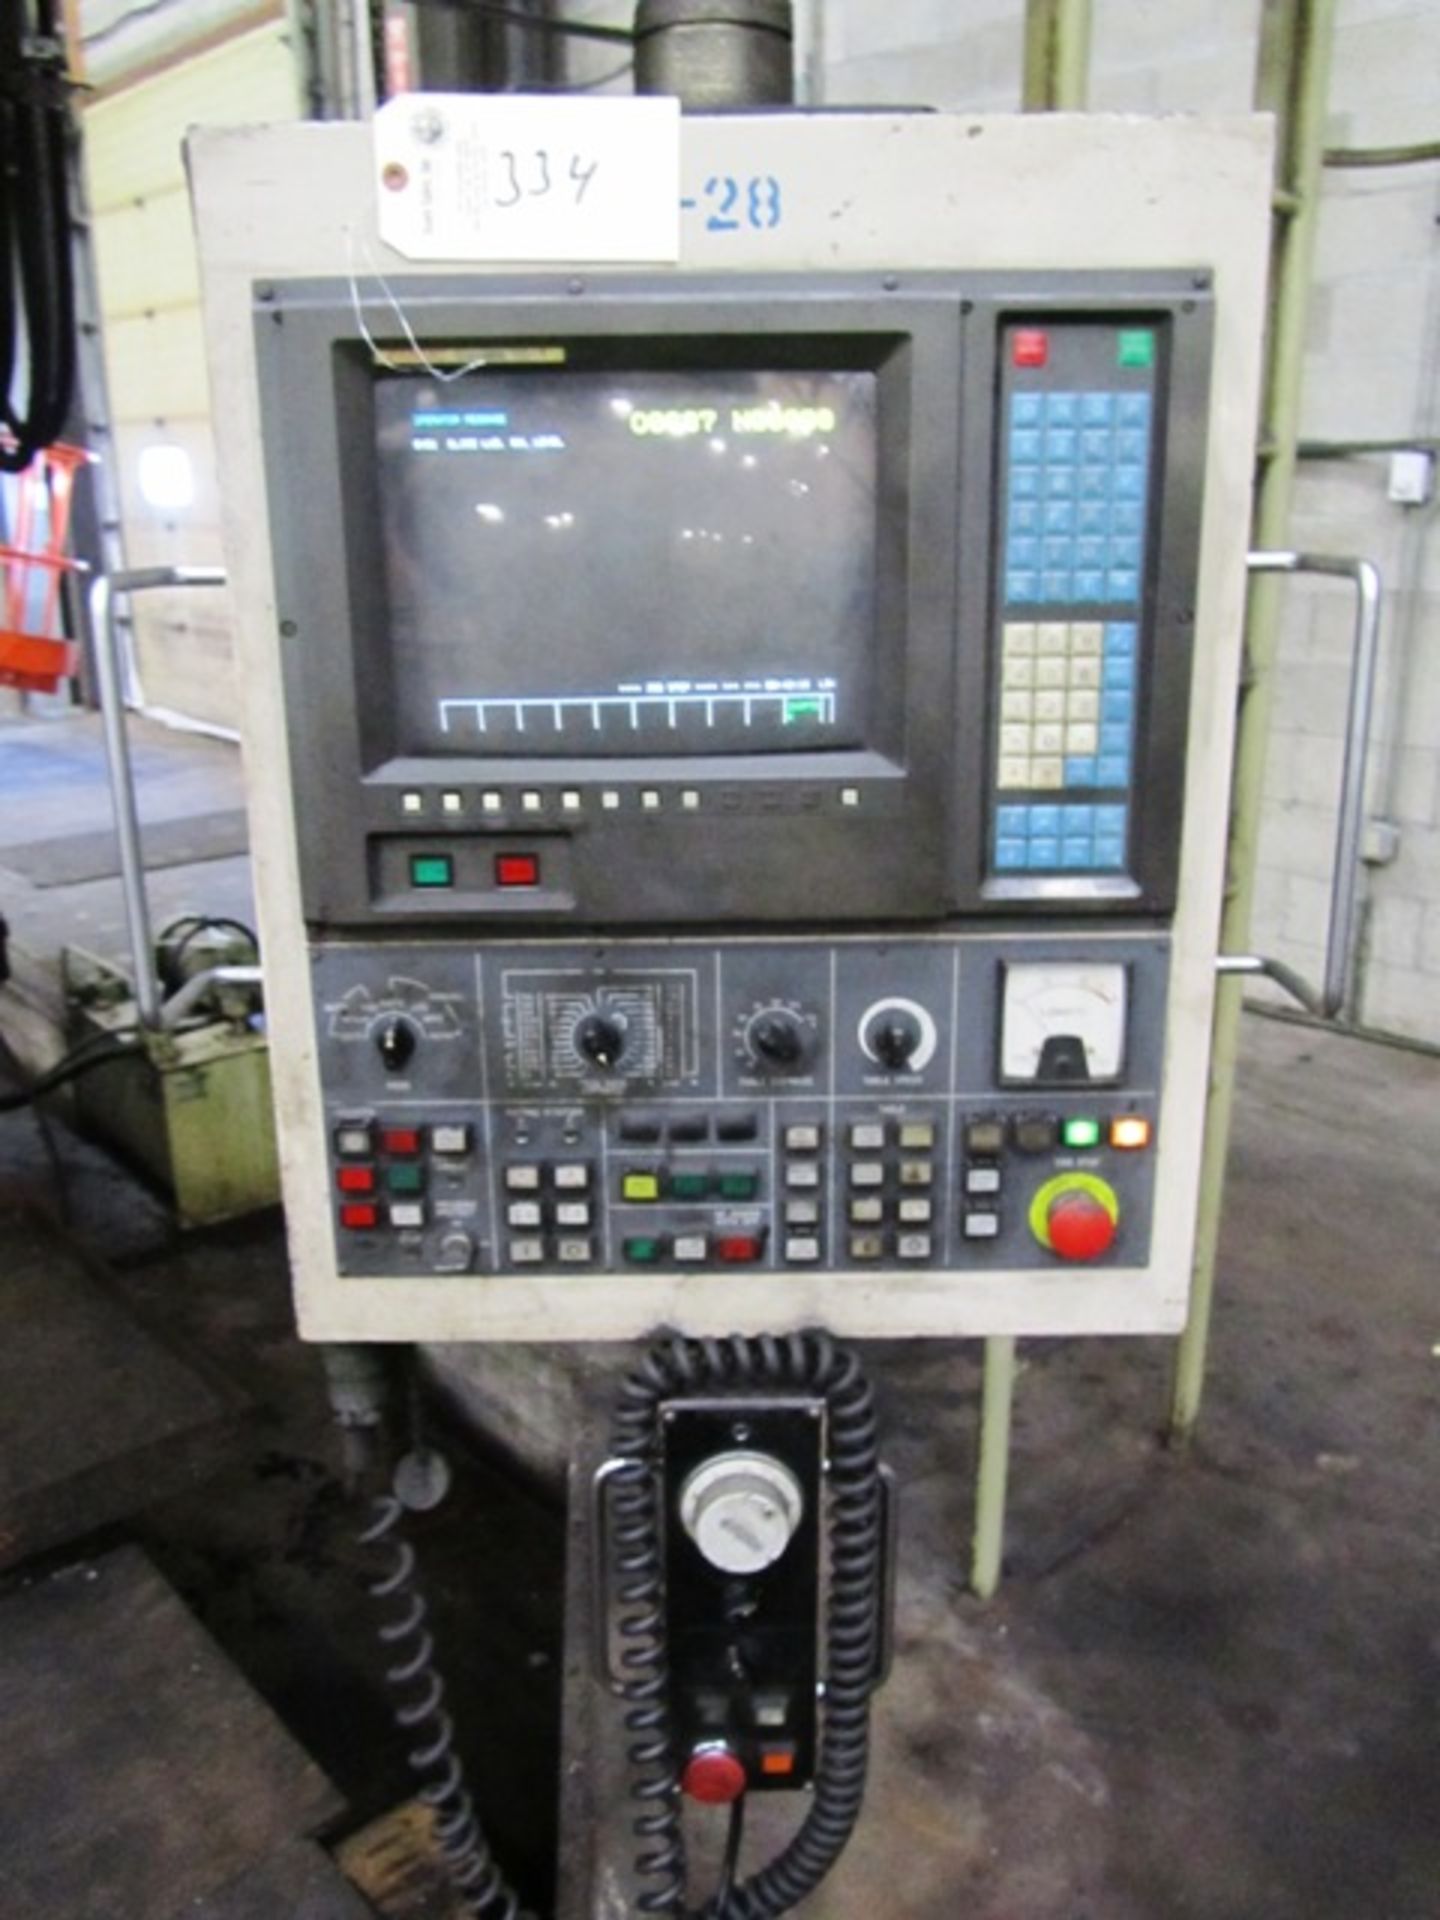 Toshiba TSS/30/55B CNC Vertical Boring Mill with Openside, 12-ATC, 118.11'' Table, 4-Jaw Chuck, - Image 2 of 7